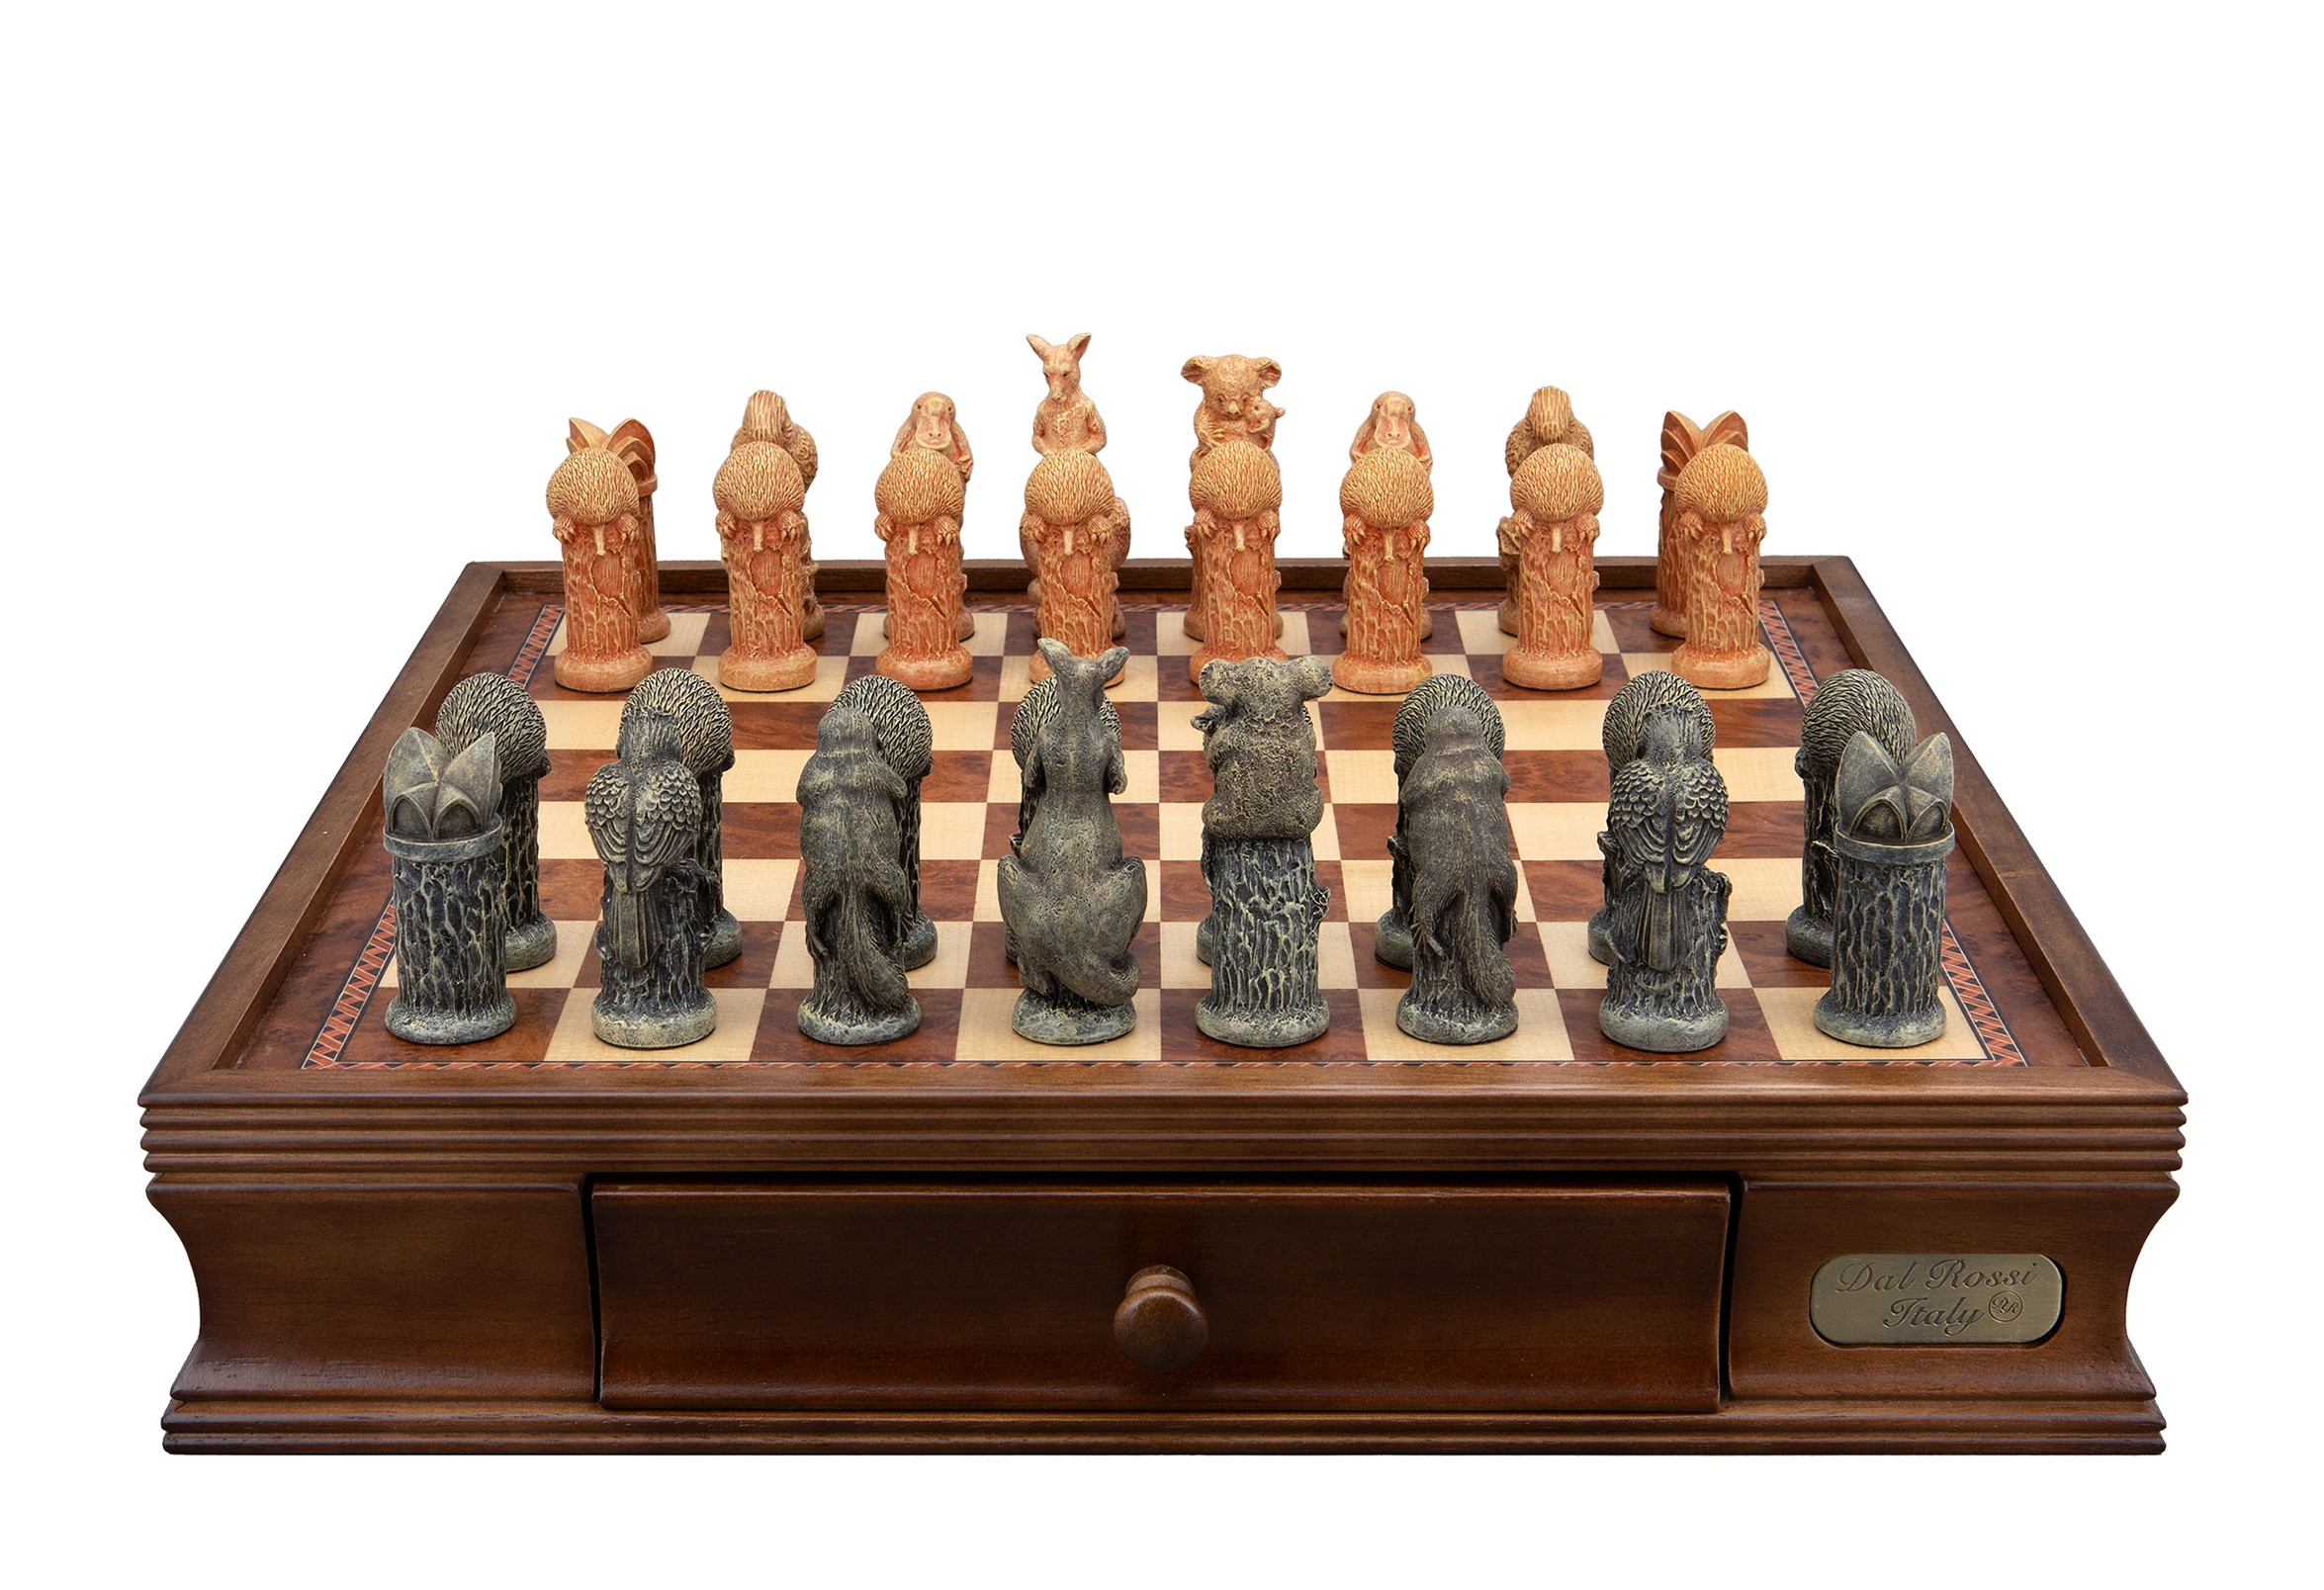 Dal Rossi Hand Paint - Australiana Chessmen on a Walnut Inlaid Chess Box with Drawers 16"